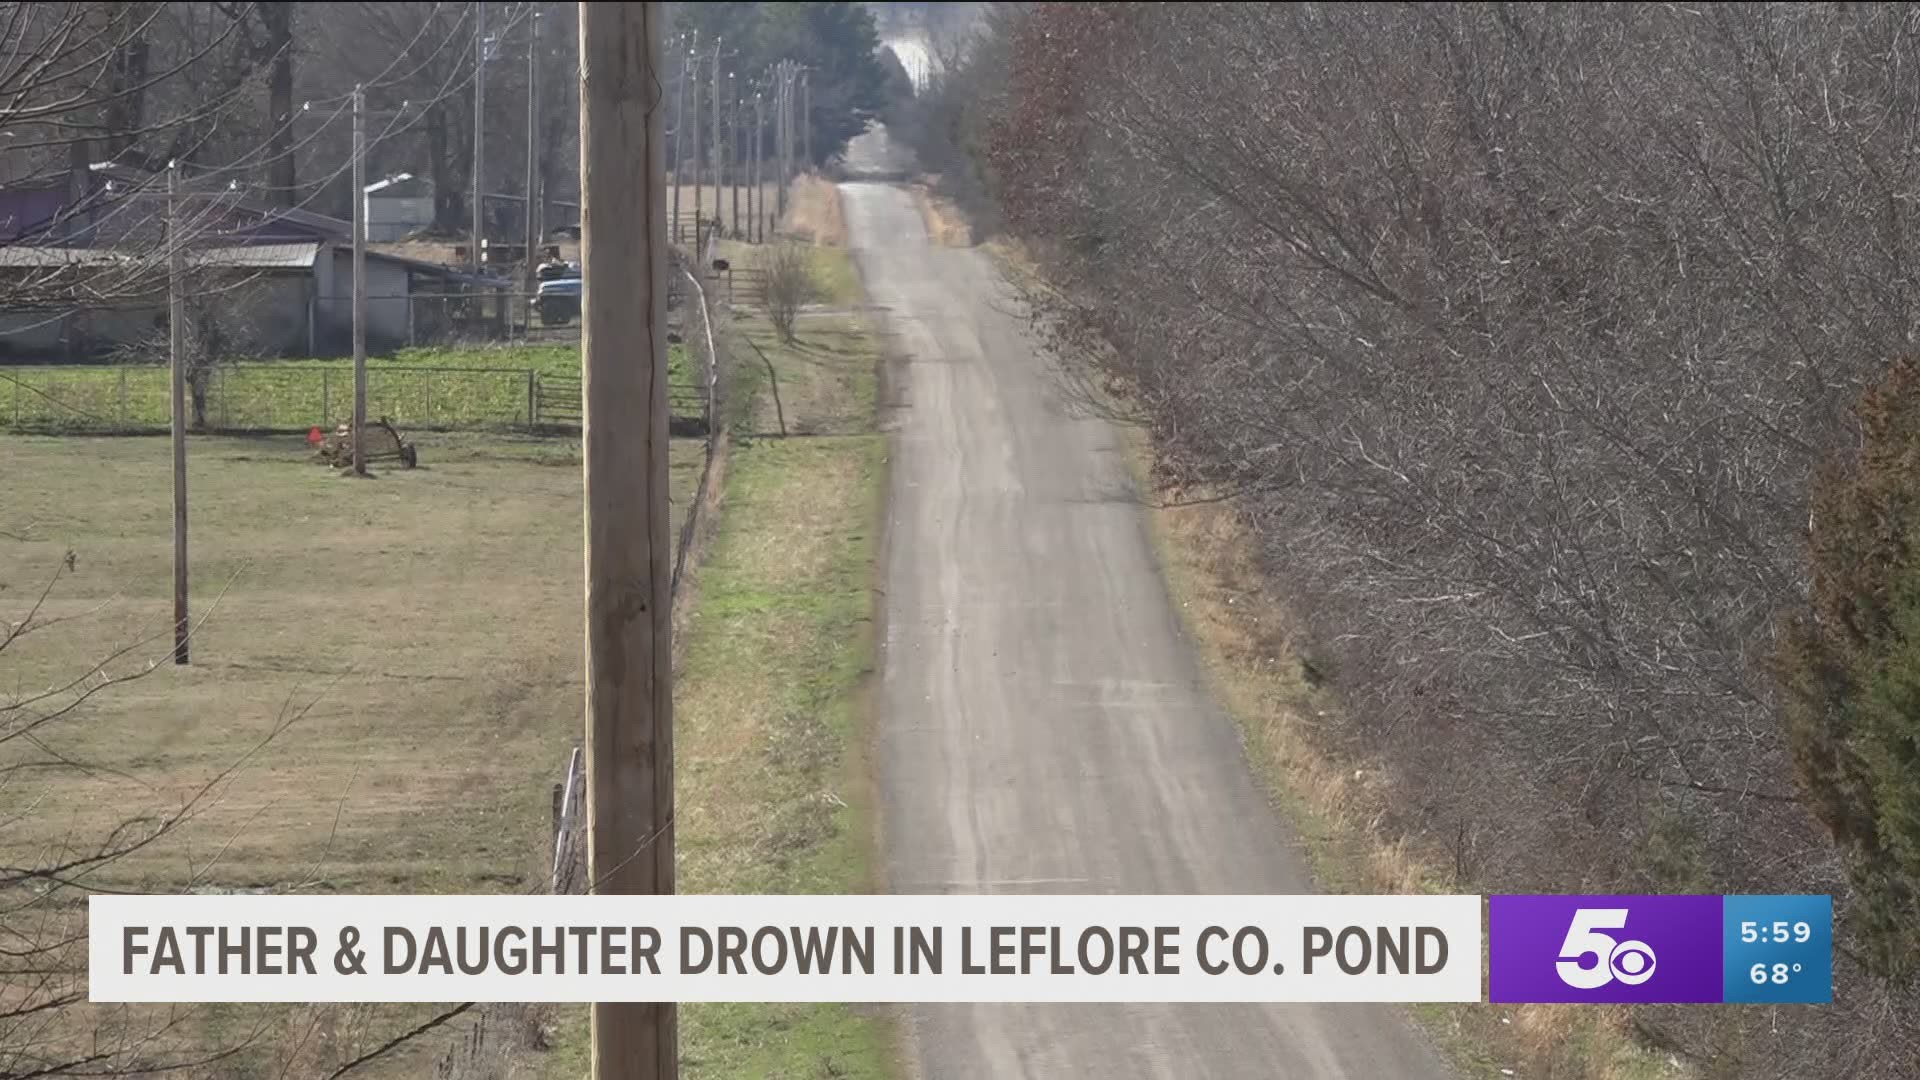 The father pulled up to a pond north of Cameron, Okla. late Wednesday afternoon. The vehicle slipped into gear and went into the pond with his daughter still inside.